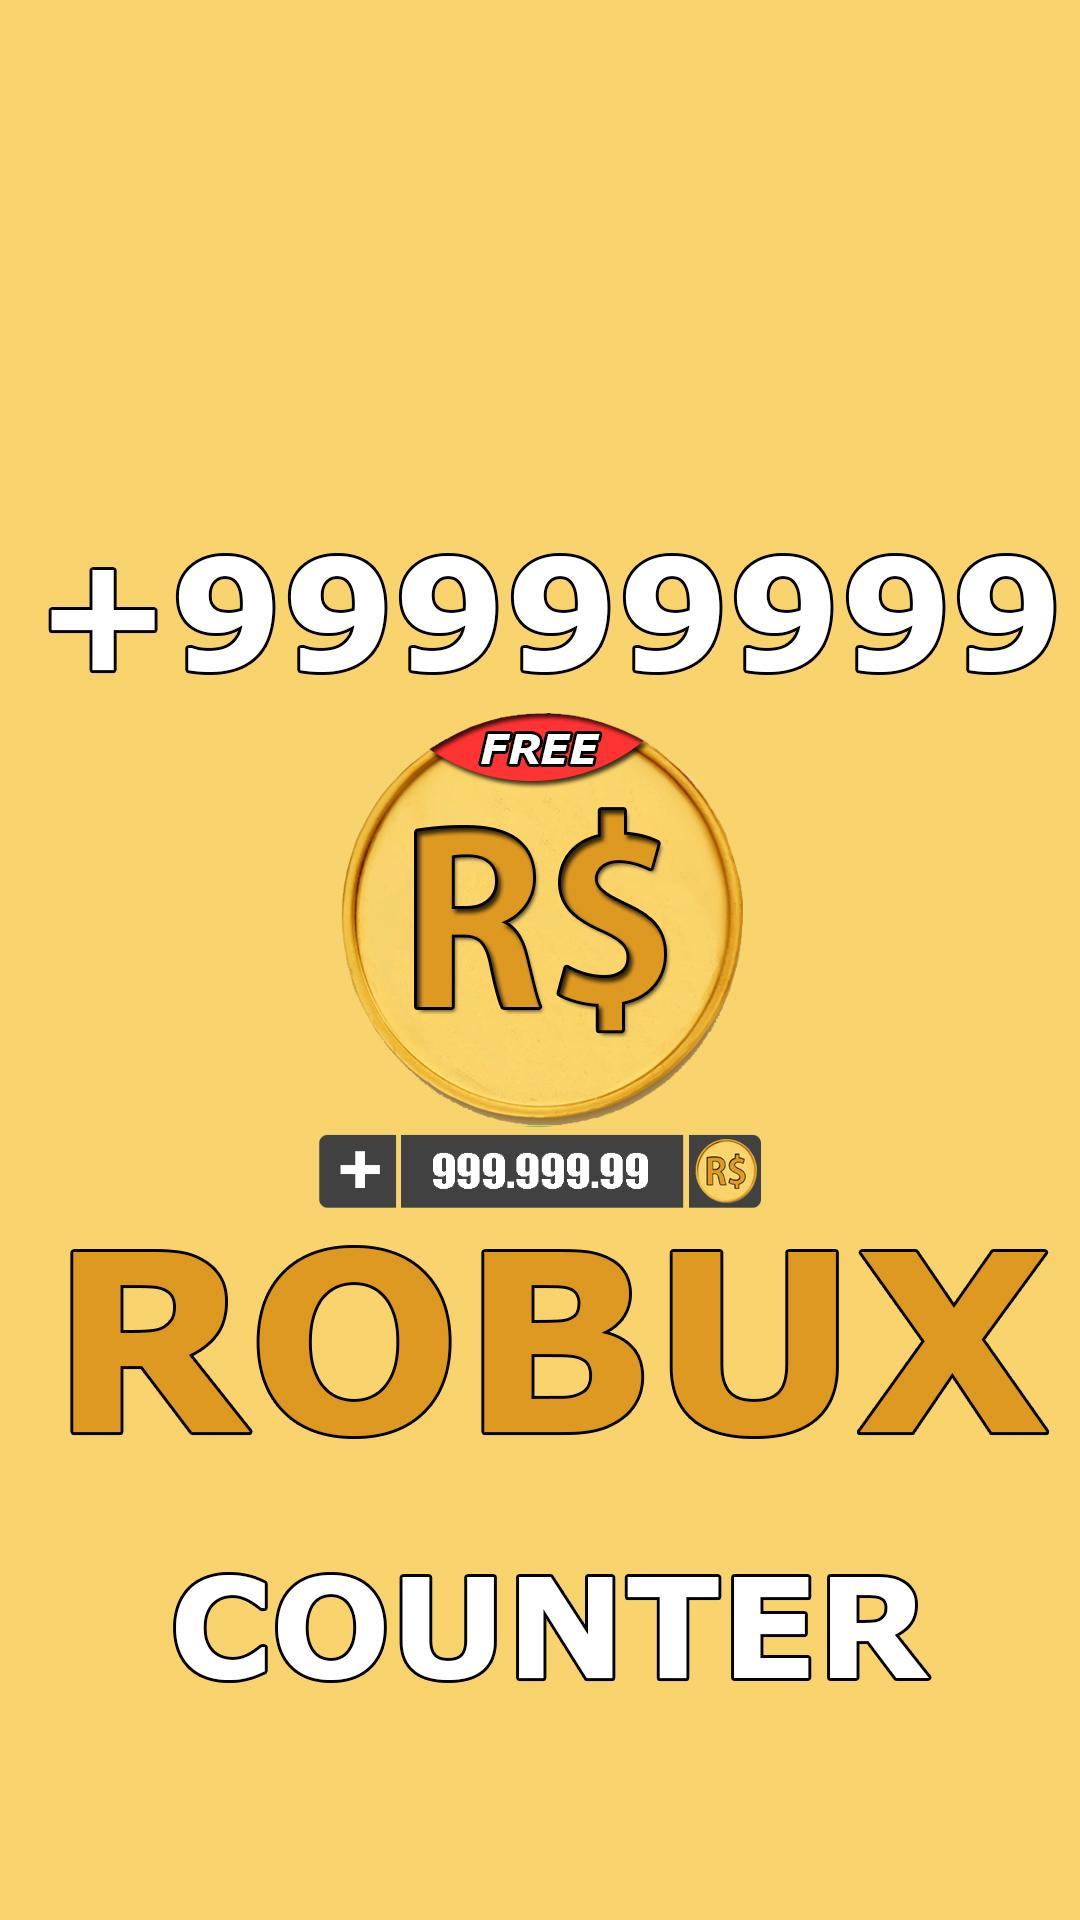 Get Robux Free Counter Rbx Free Robux Codes Calc For Android Apk Download - free robux counter for roblox apk 10 download for android